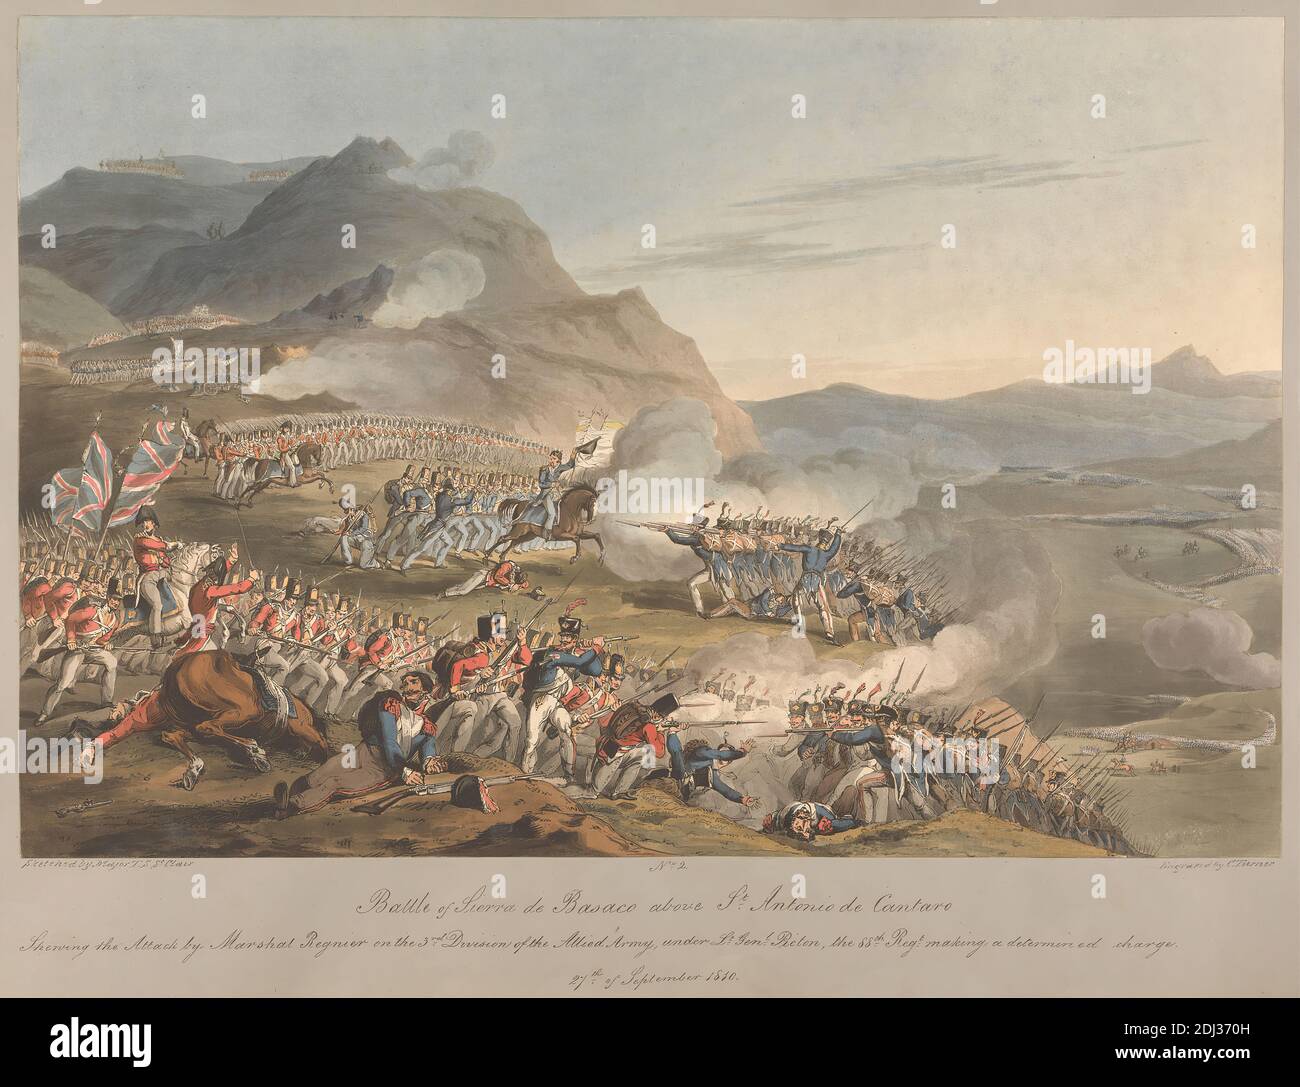 No.2 Battle of Sierra de Basaco above St. Antonio de Cantaro, Charles Turner, 1774–1857, British, after T. St. Clair, active 1810–1815, 1810, Aquatint, colored, army, battle, military art, Portugal Stock Photo